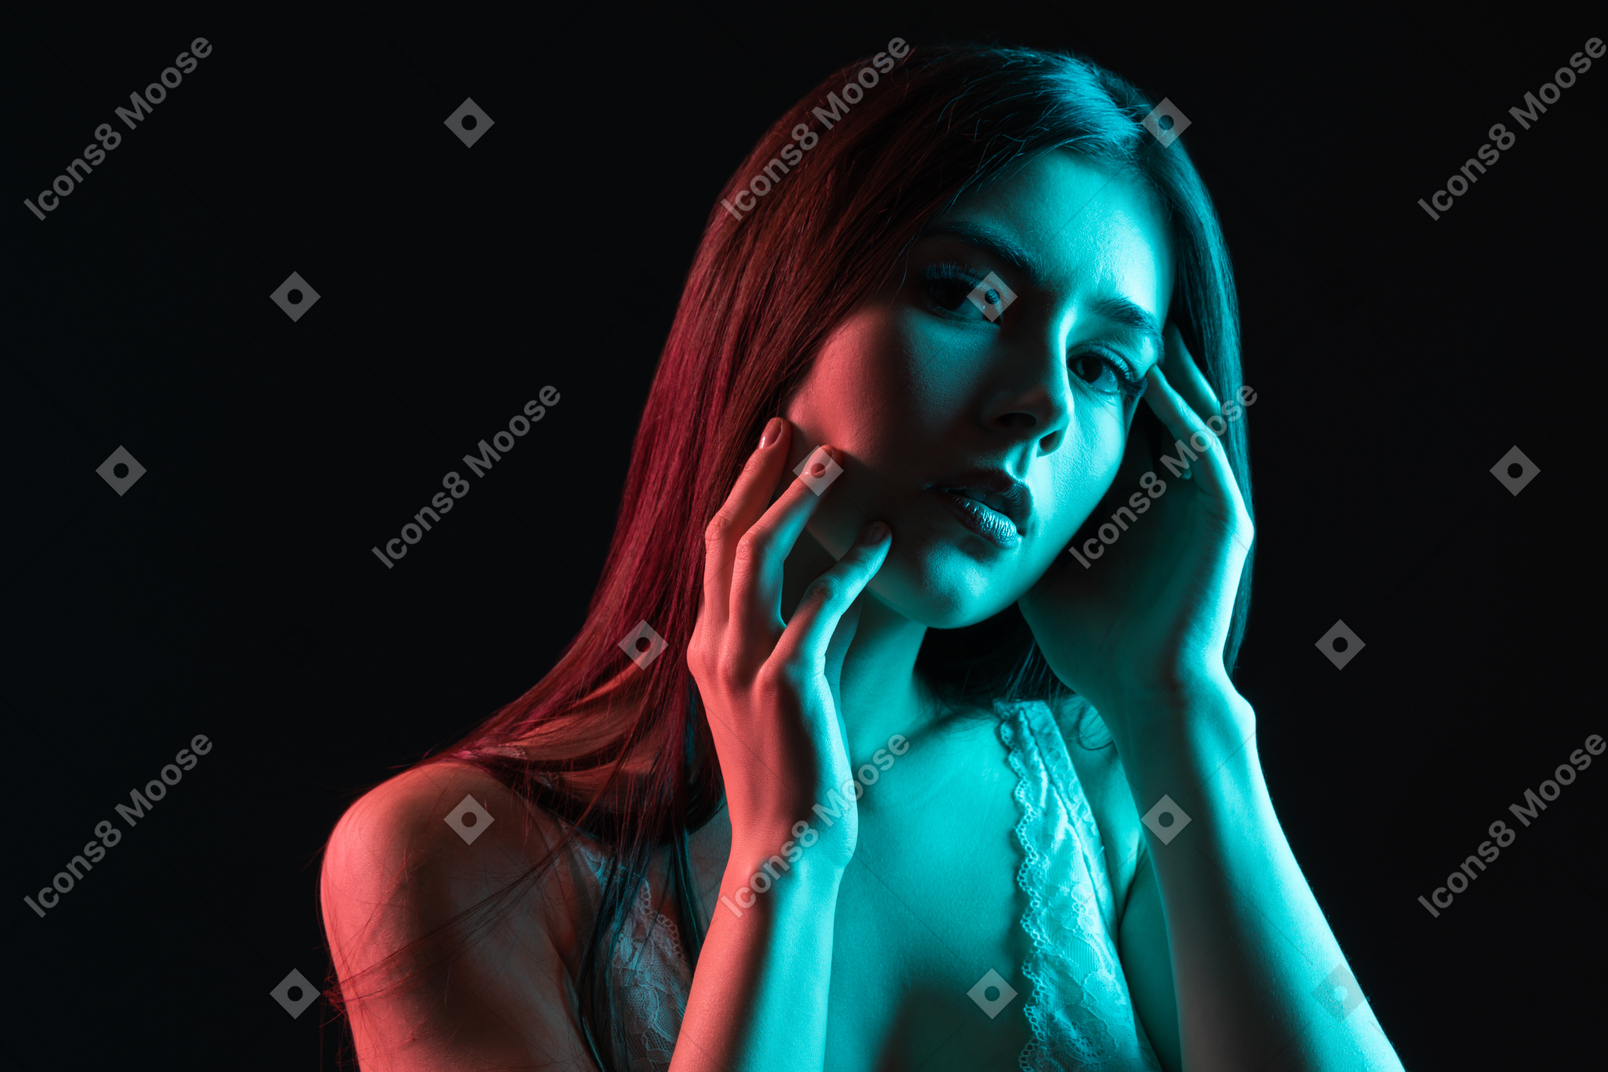 A young female under red and blue neon lights touching her face